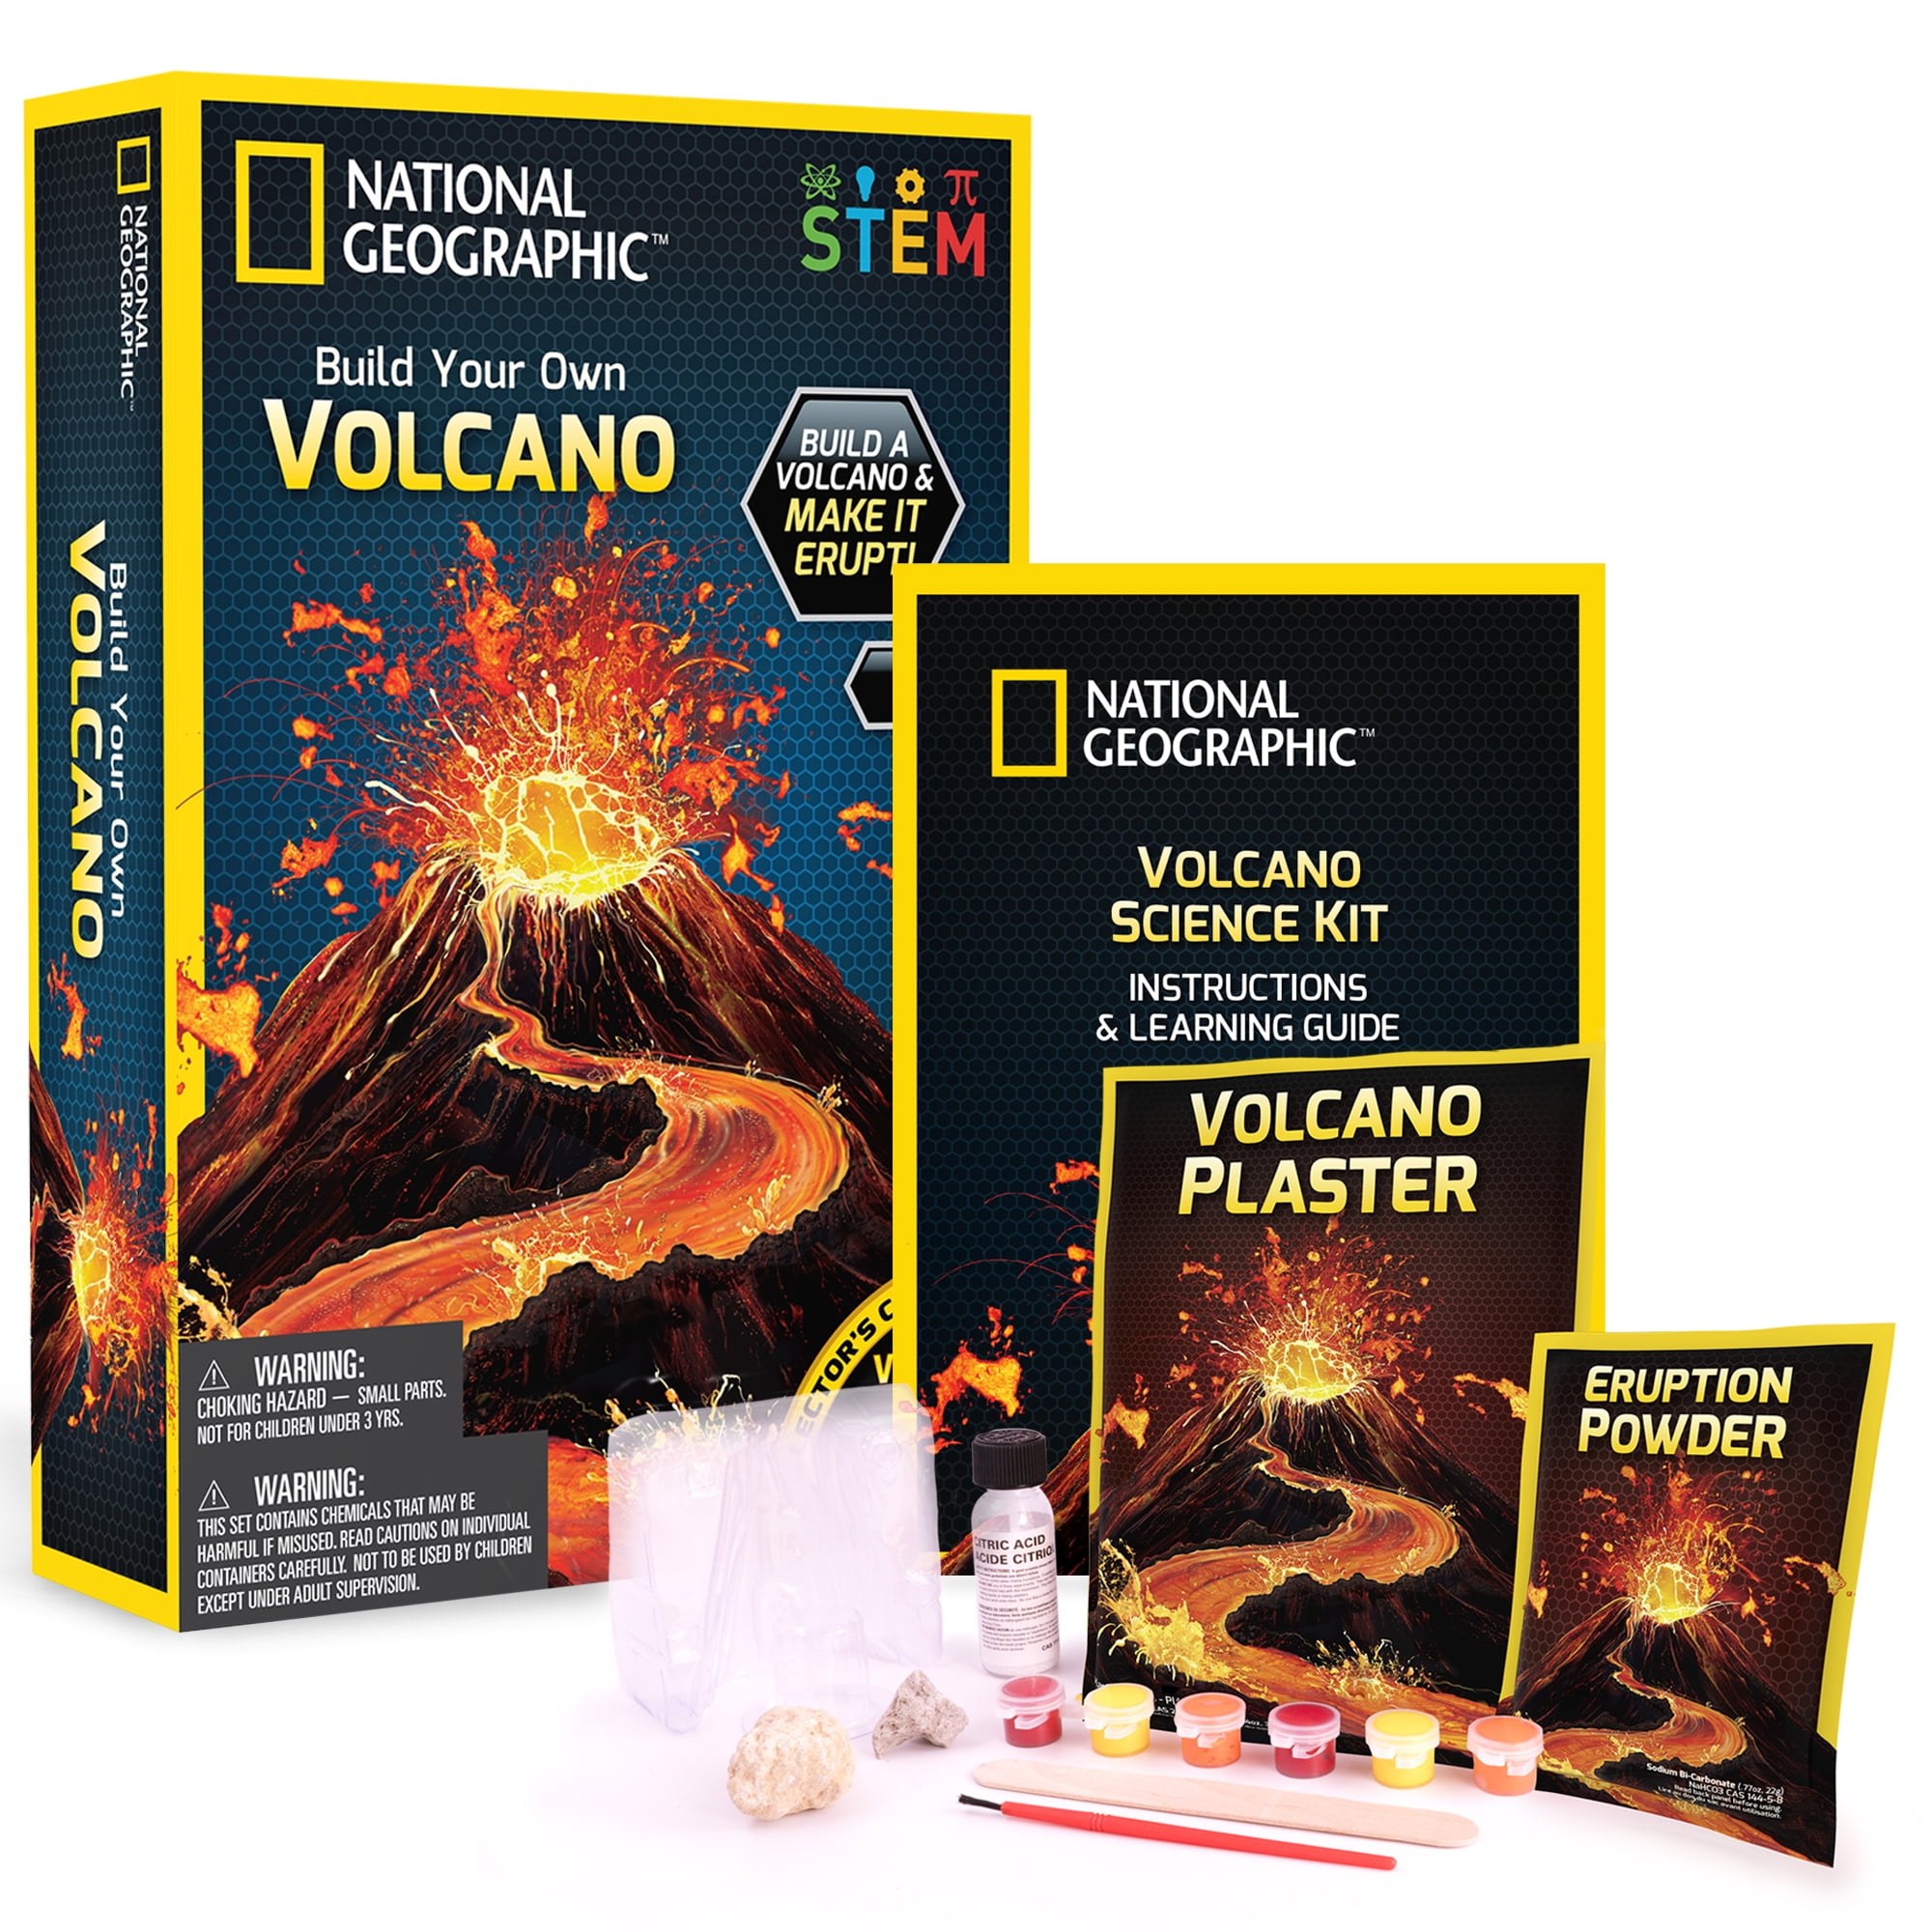 Volcano Science Kit STEM Activities for Kids Over 20 Experiments! DIY Geology Chemistry Set Educational Learning Toys